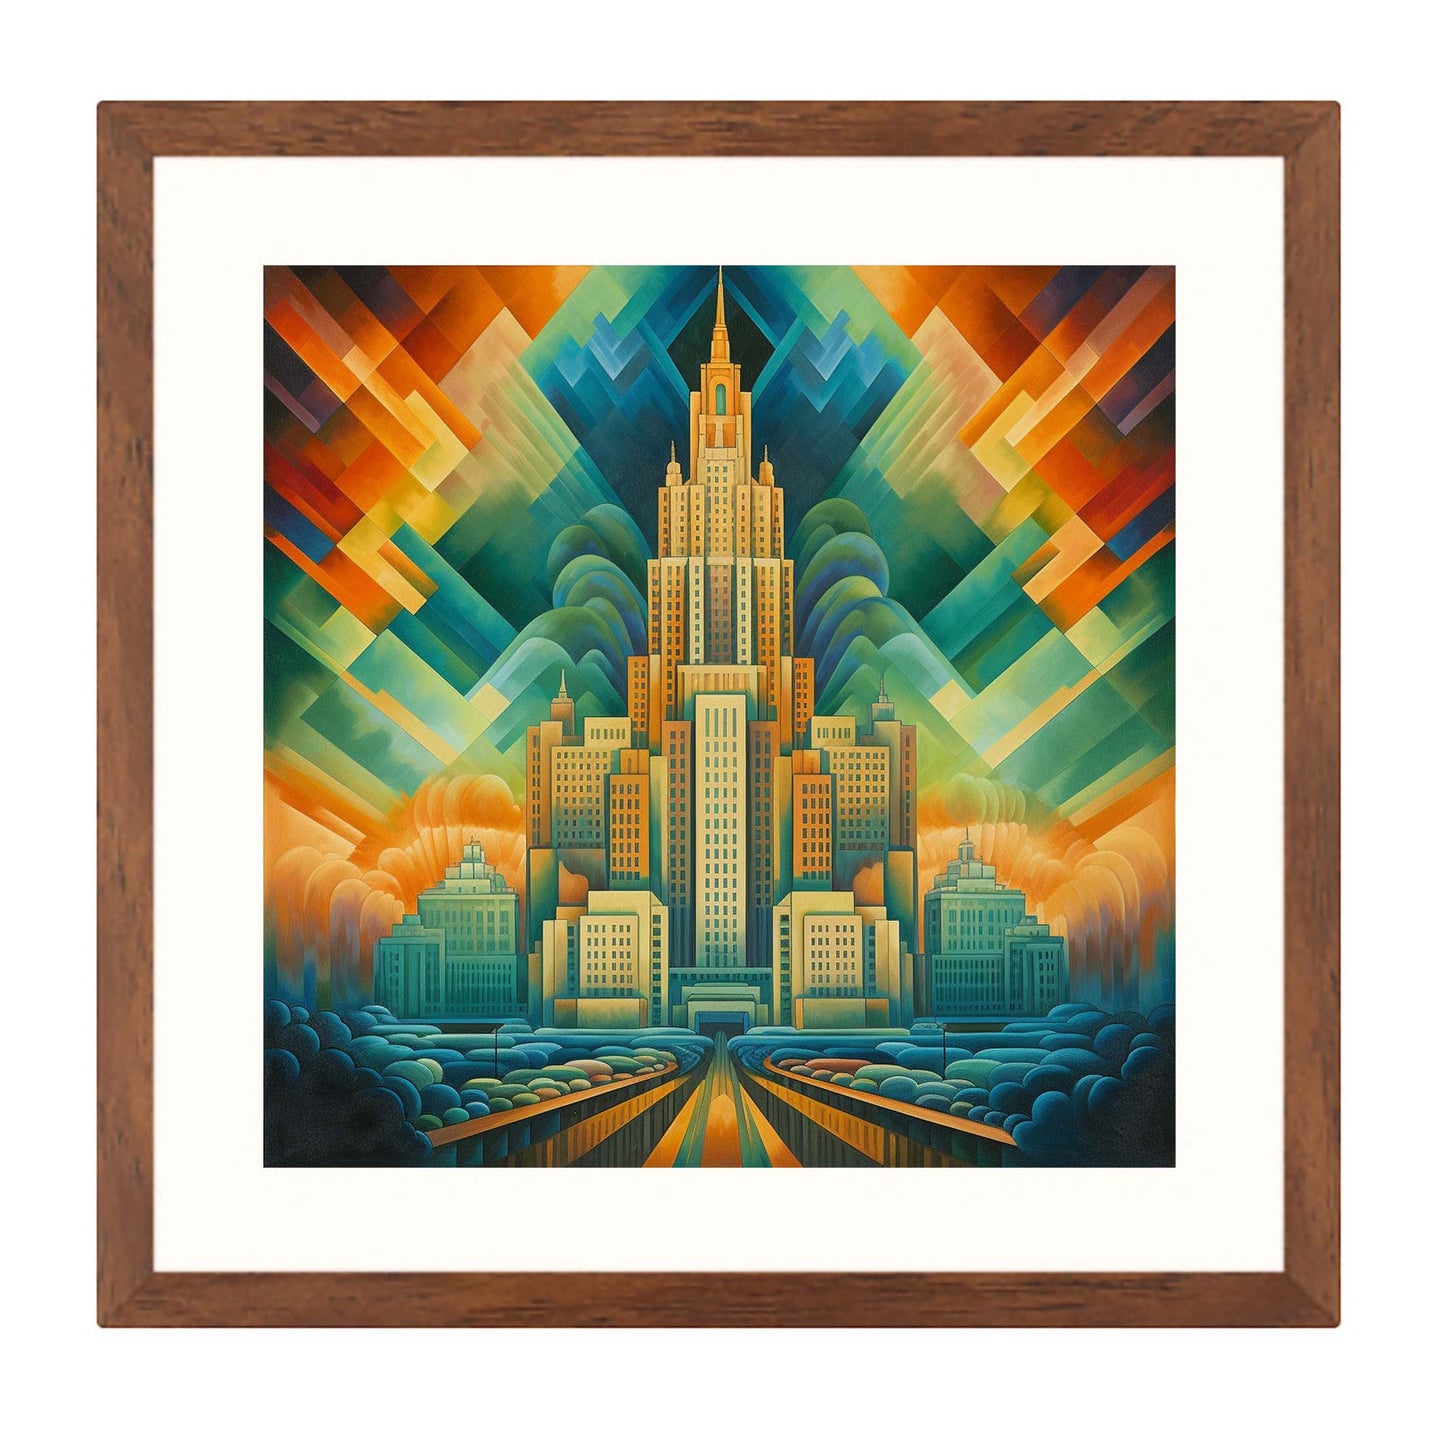 Warsaw Palace of Culture - mural in Futurism style